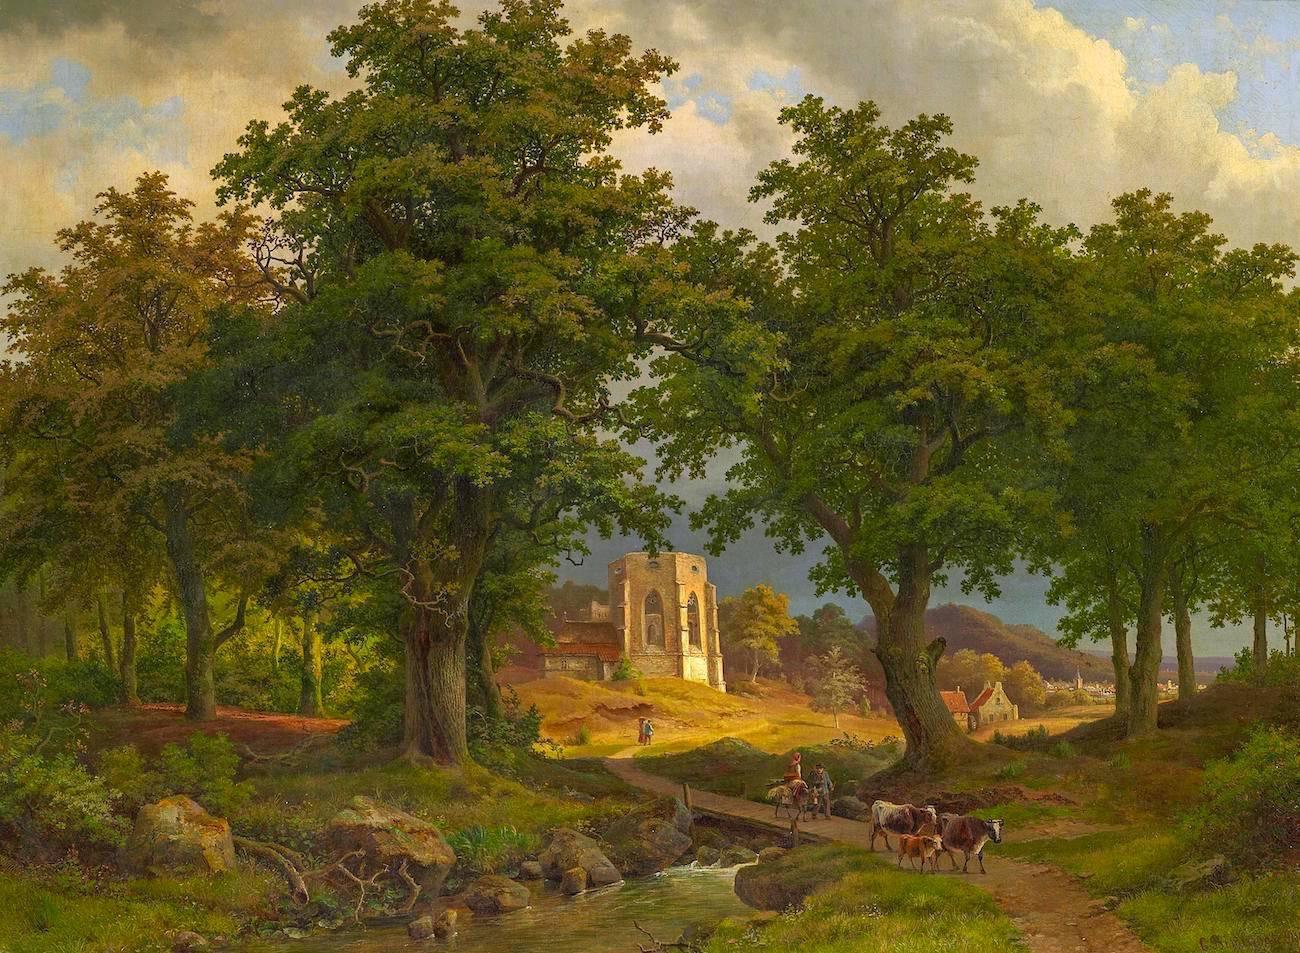 Bimmerman, Cäsar, 1821 Eupen-1888 Düsseldorf
Broad wooded landscape in evening light.
In the background a ruin of a Gothic church. In the foreground shepherds with their cattle.
Oil on canvas. Measures: 77 x 105cm. Signed lower right: C. Bimmerman